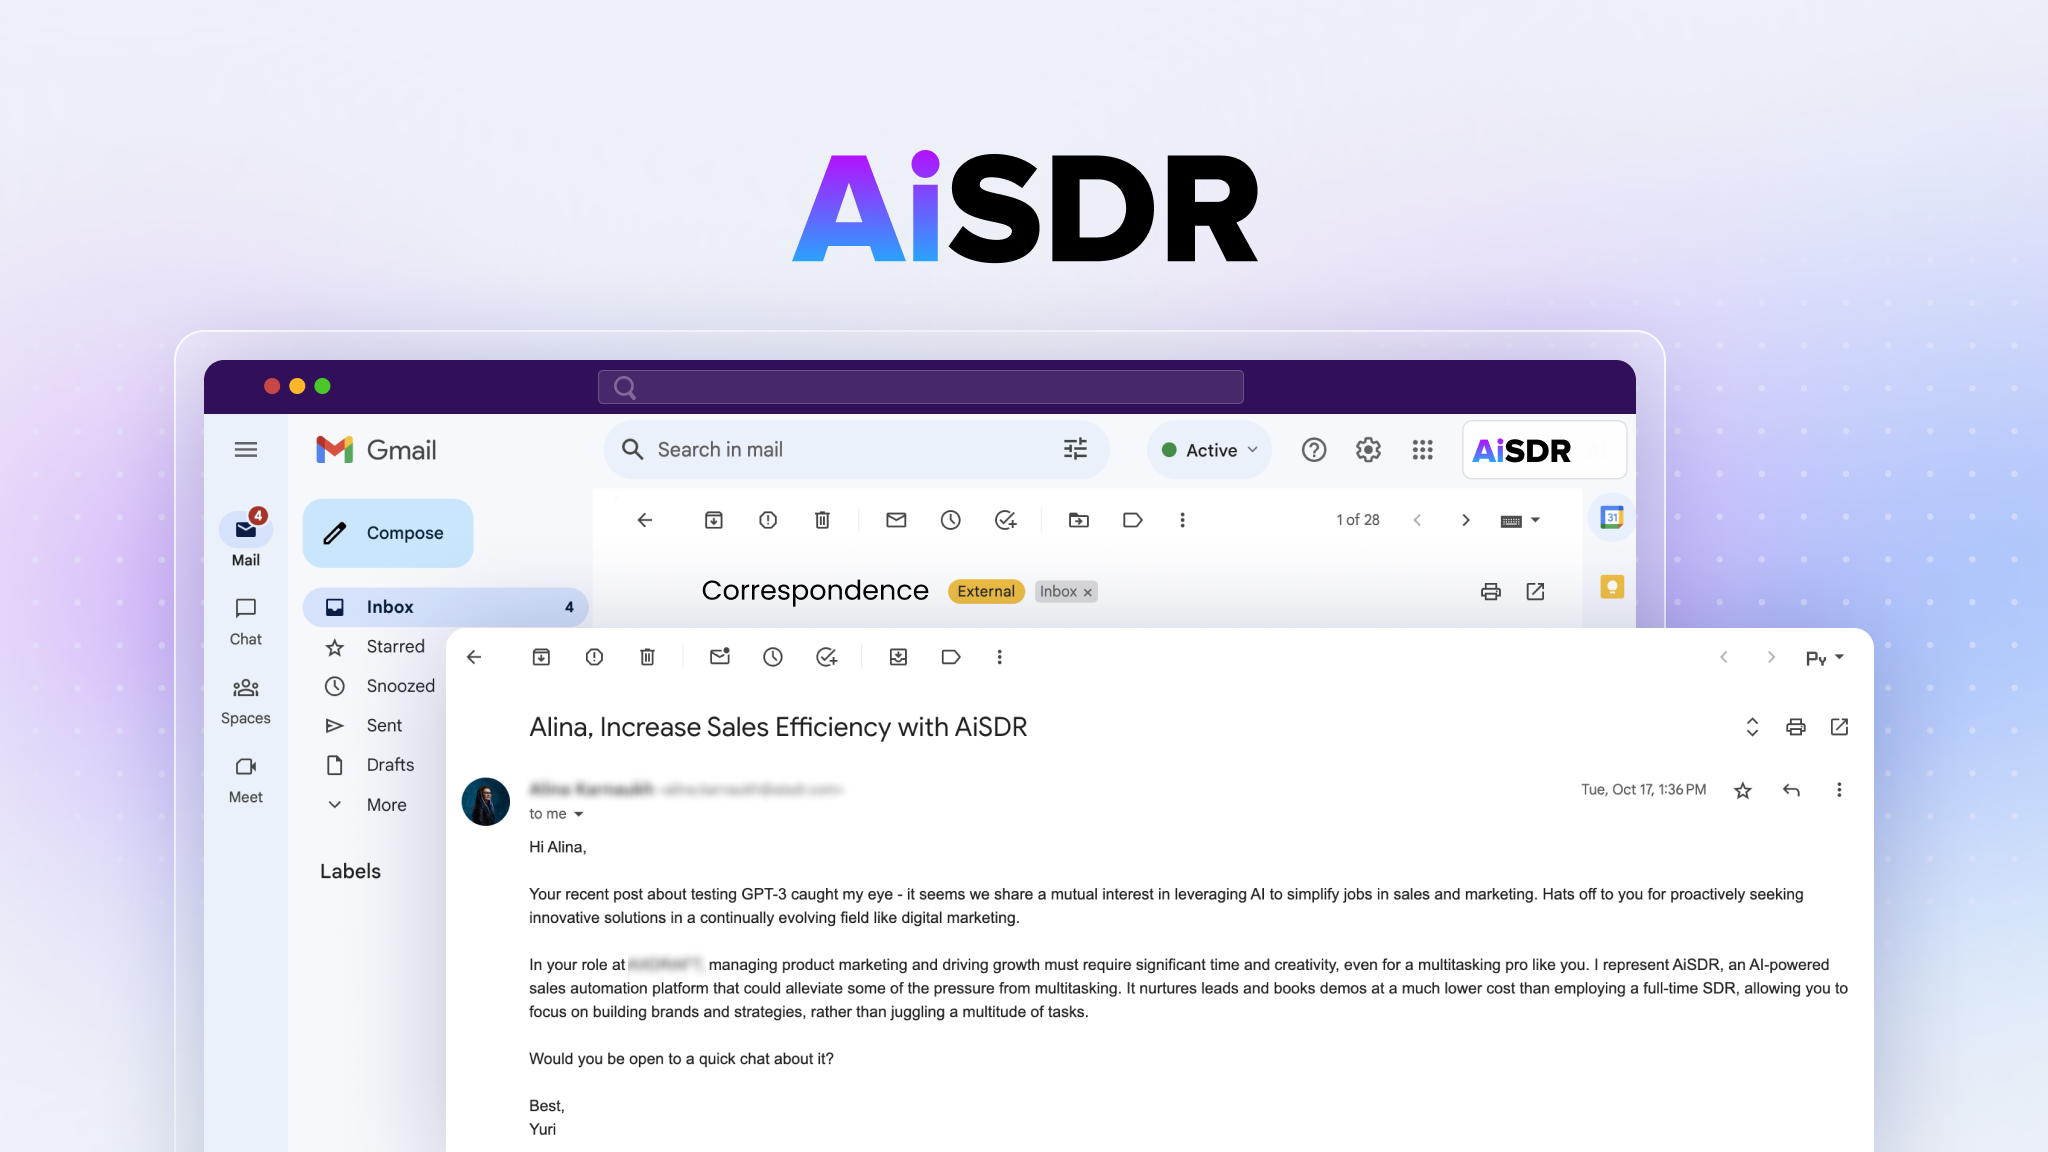 AiSDR emails in Gmail inbox